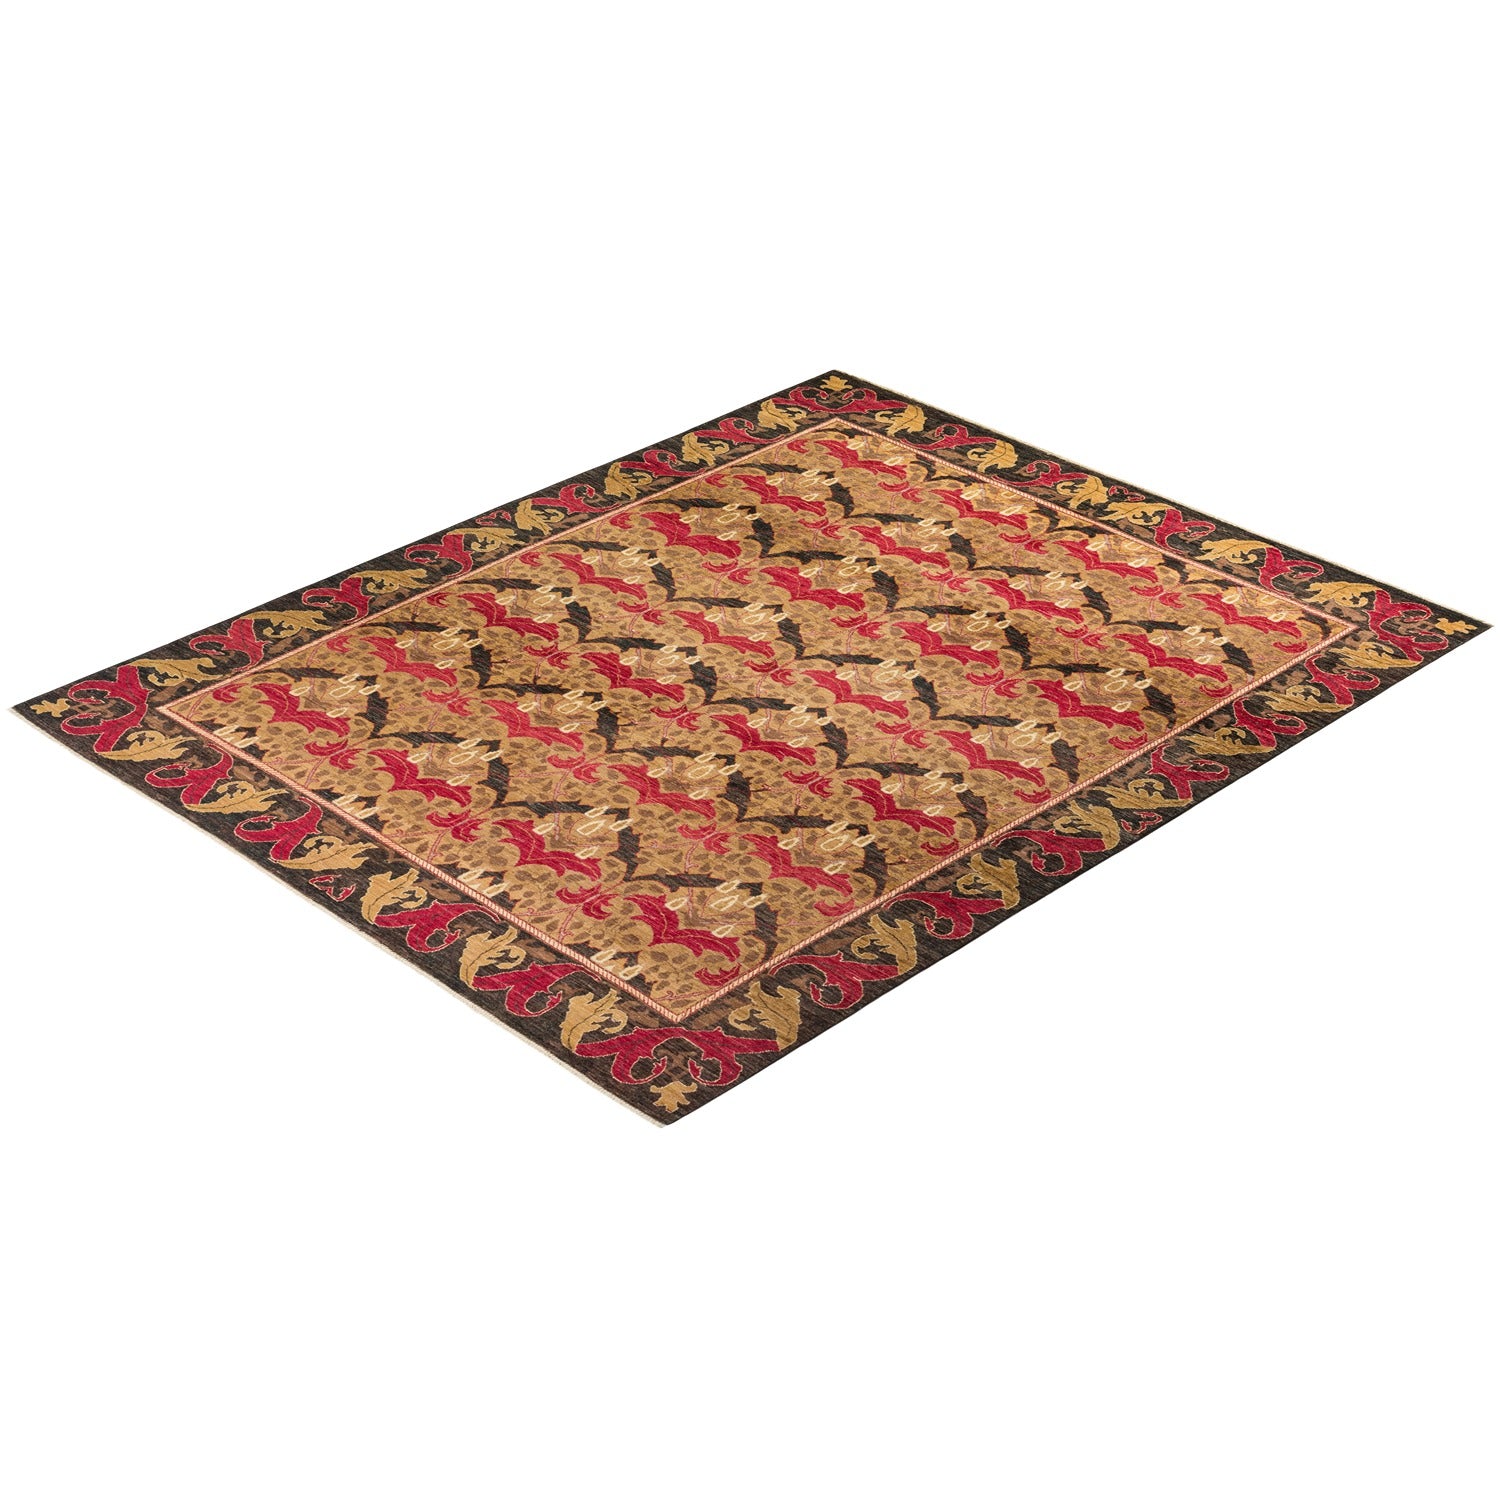 Exquisite handwoven Persian-inspired carpet showcases intricate floral motifs and rich colors.